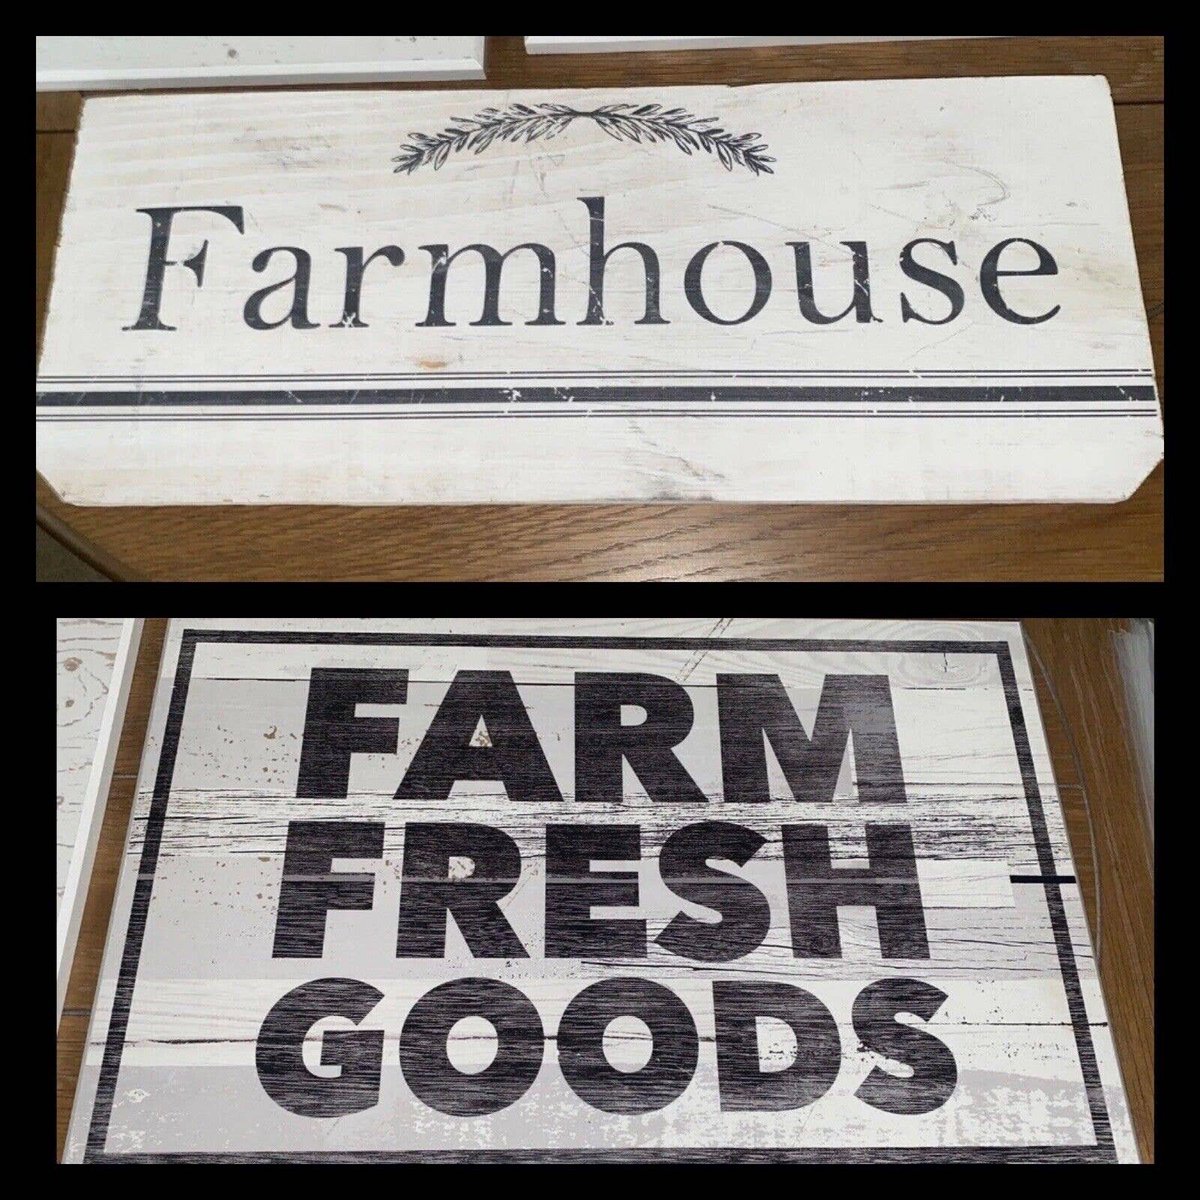 Excited to share the latest addition to my #etsy shop: 2 Farmhouse Signs Farm Fresh Goods & Distressed Plaque Wood Wall Decor etsy.me/3ZhnEuG  #bedroom #woodsign #homedecor #walldecor #farmsign #farmhousesign #sign #fabulousfinds007